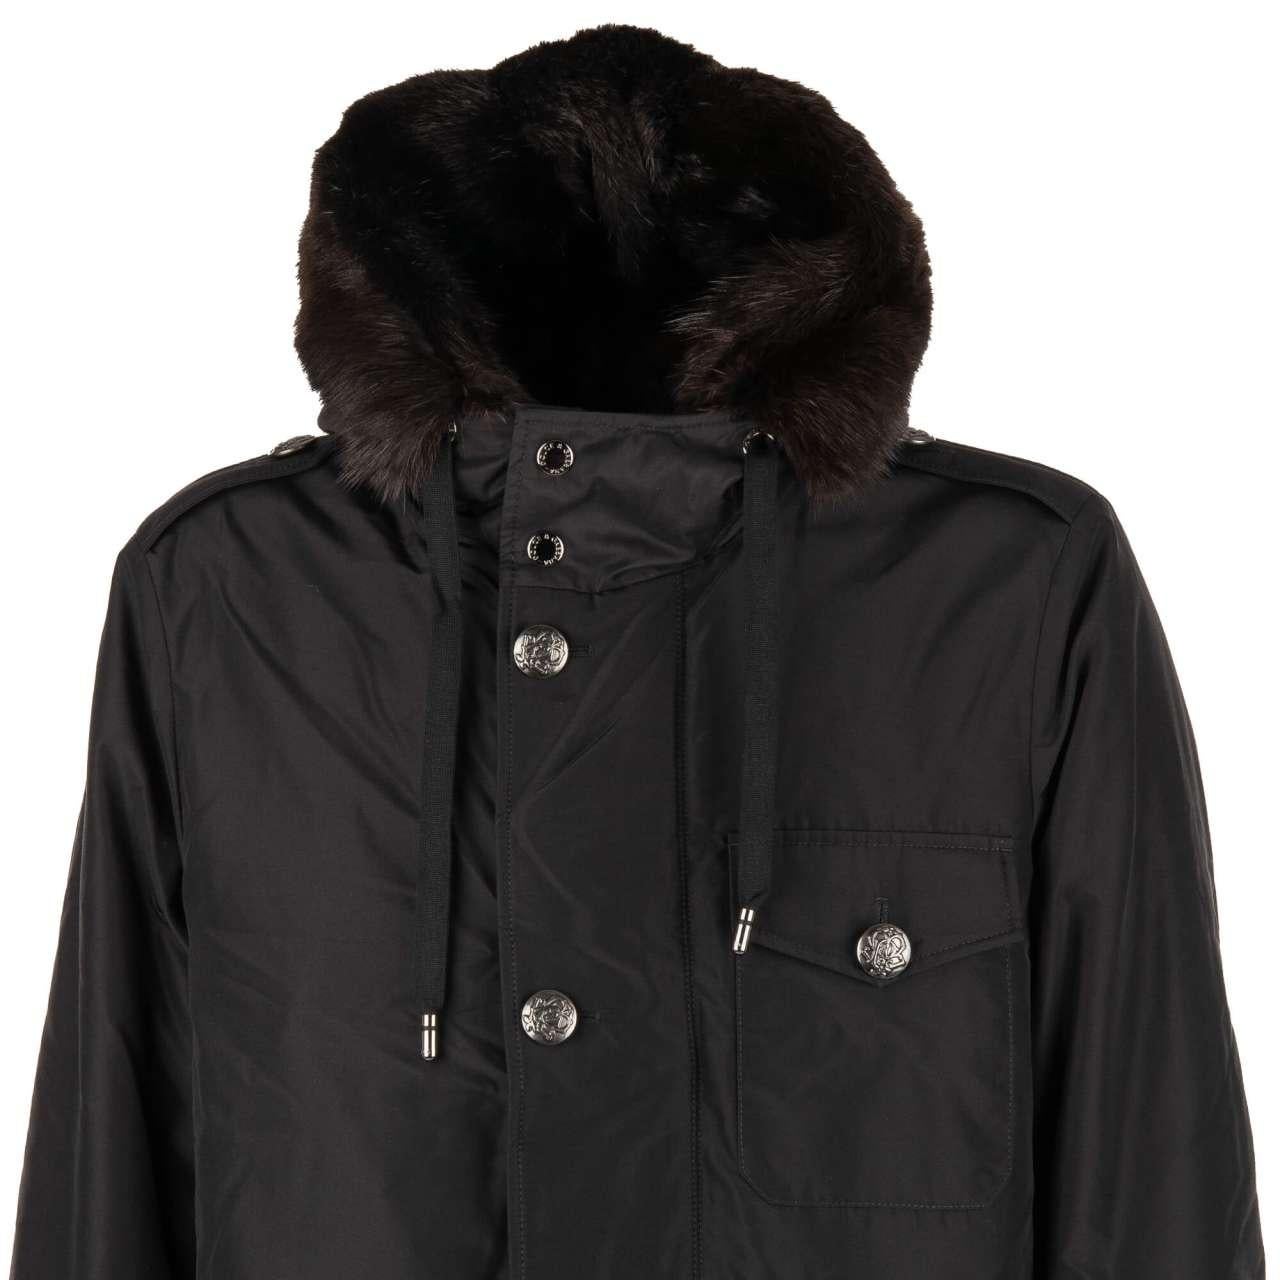 Dolce & Gabbana Silk Parka Jacket with Detachable Fur Lining and Hoody Black 54 For Sale 5